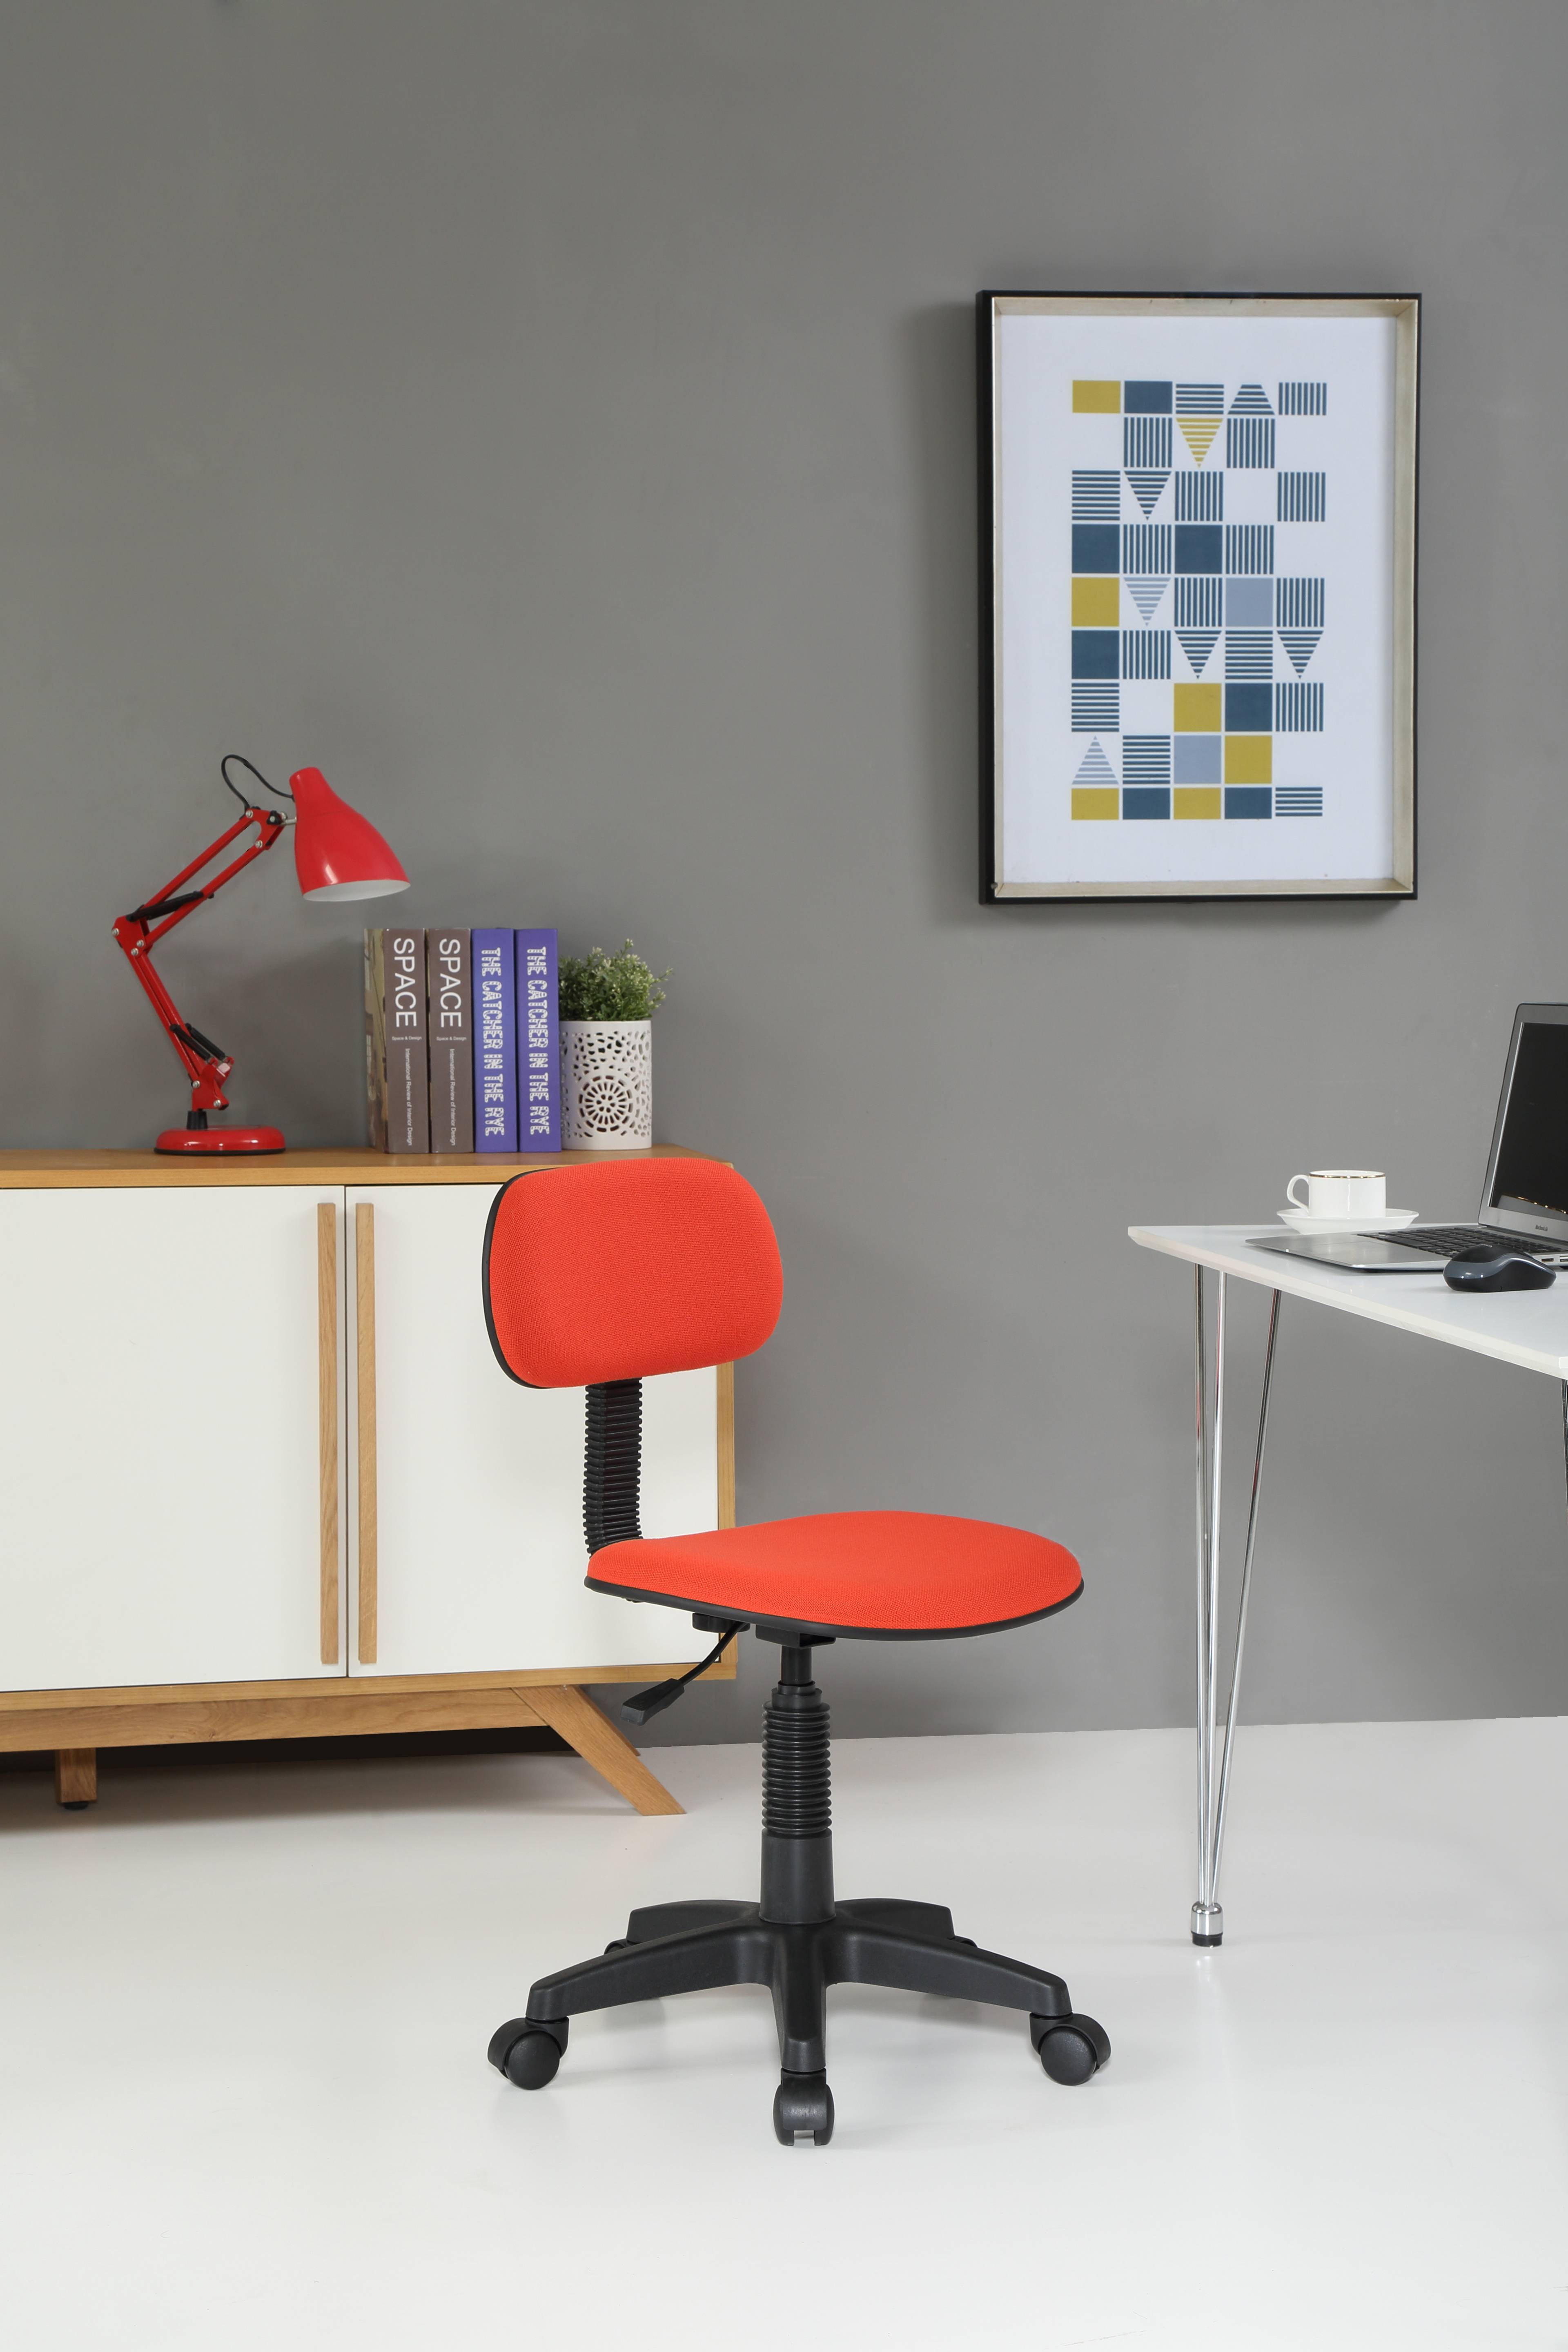 12 Best Office Chairs for People with ADHD by hansdersch - Issuu